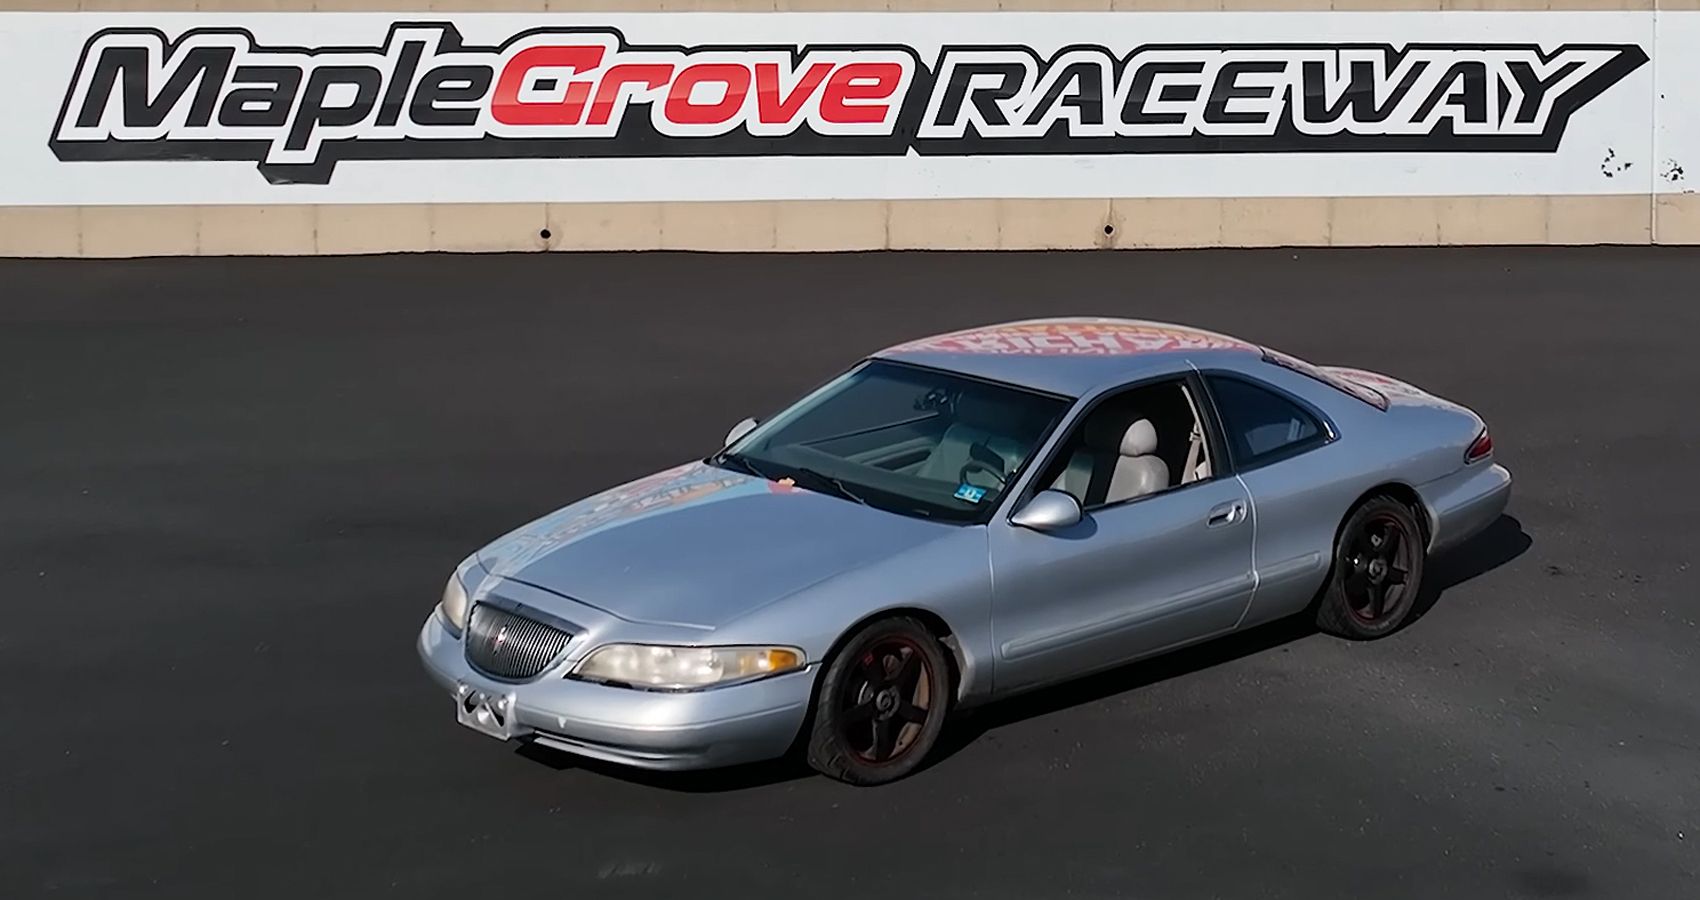 How This $4,200 Lincoln Mark VIII Makes 400 HP To The Wheels